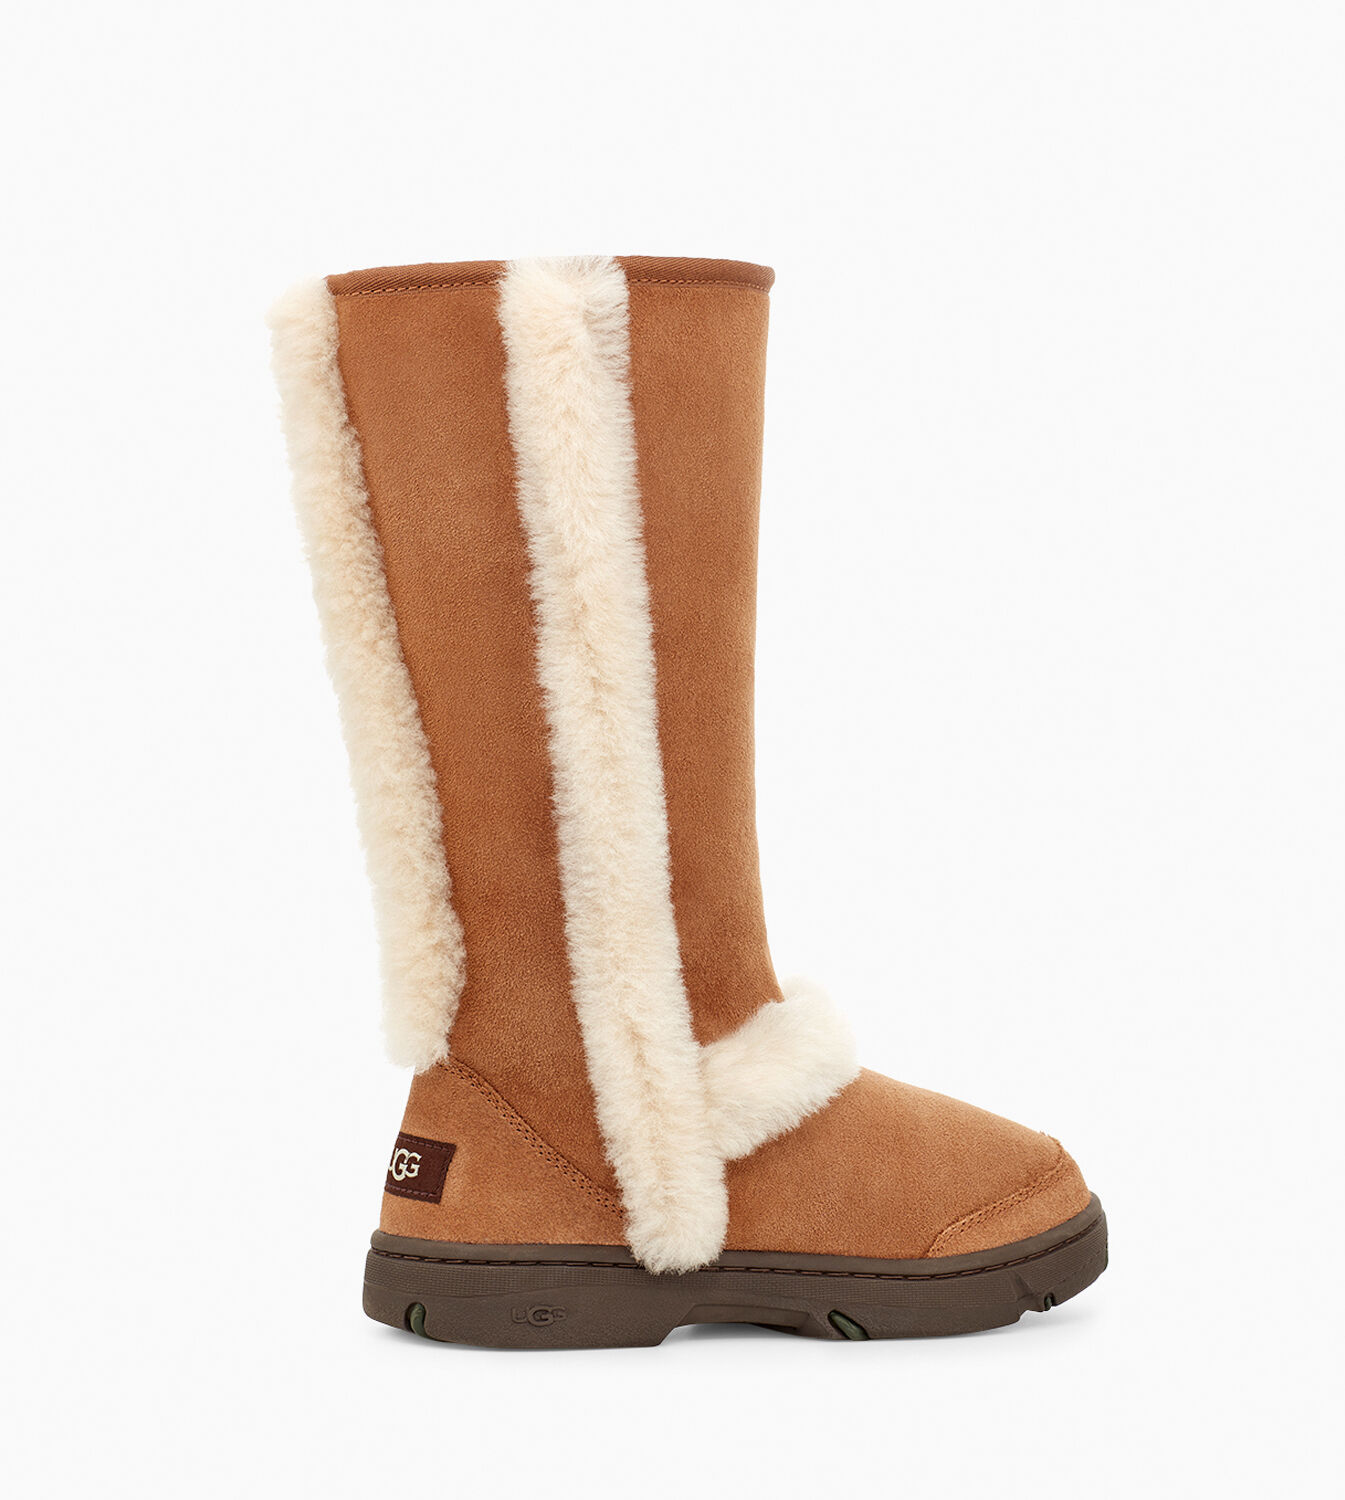 discontinued ugg boots clearance sale